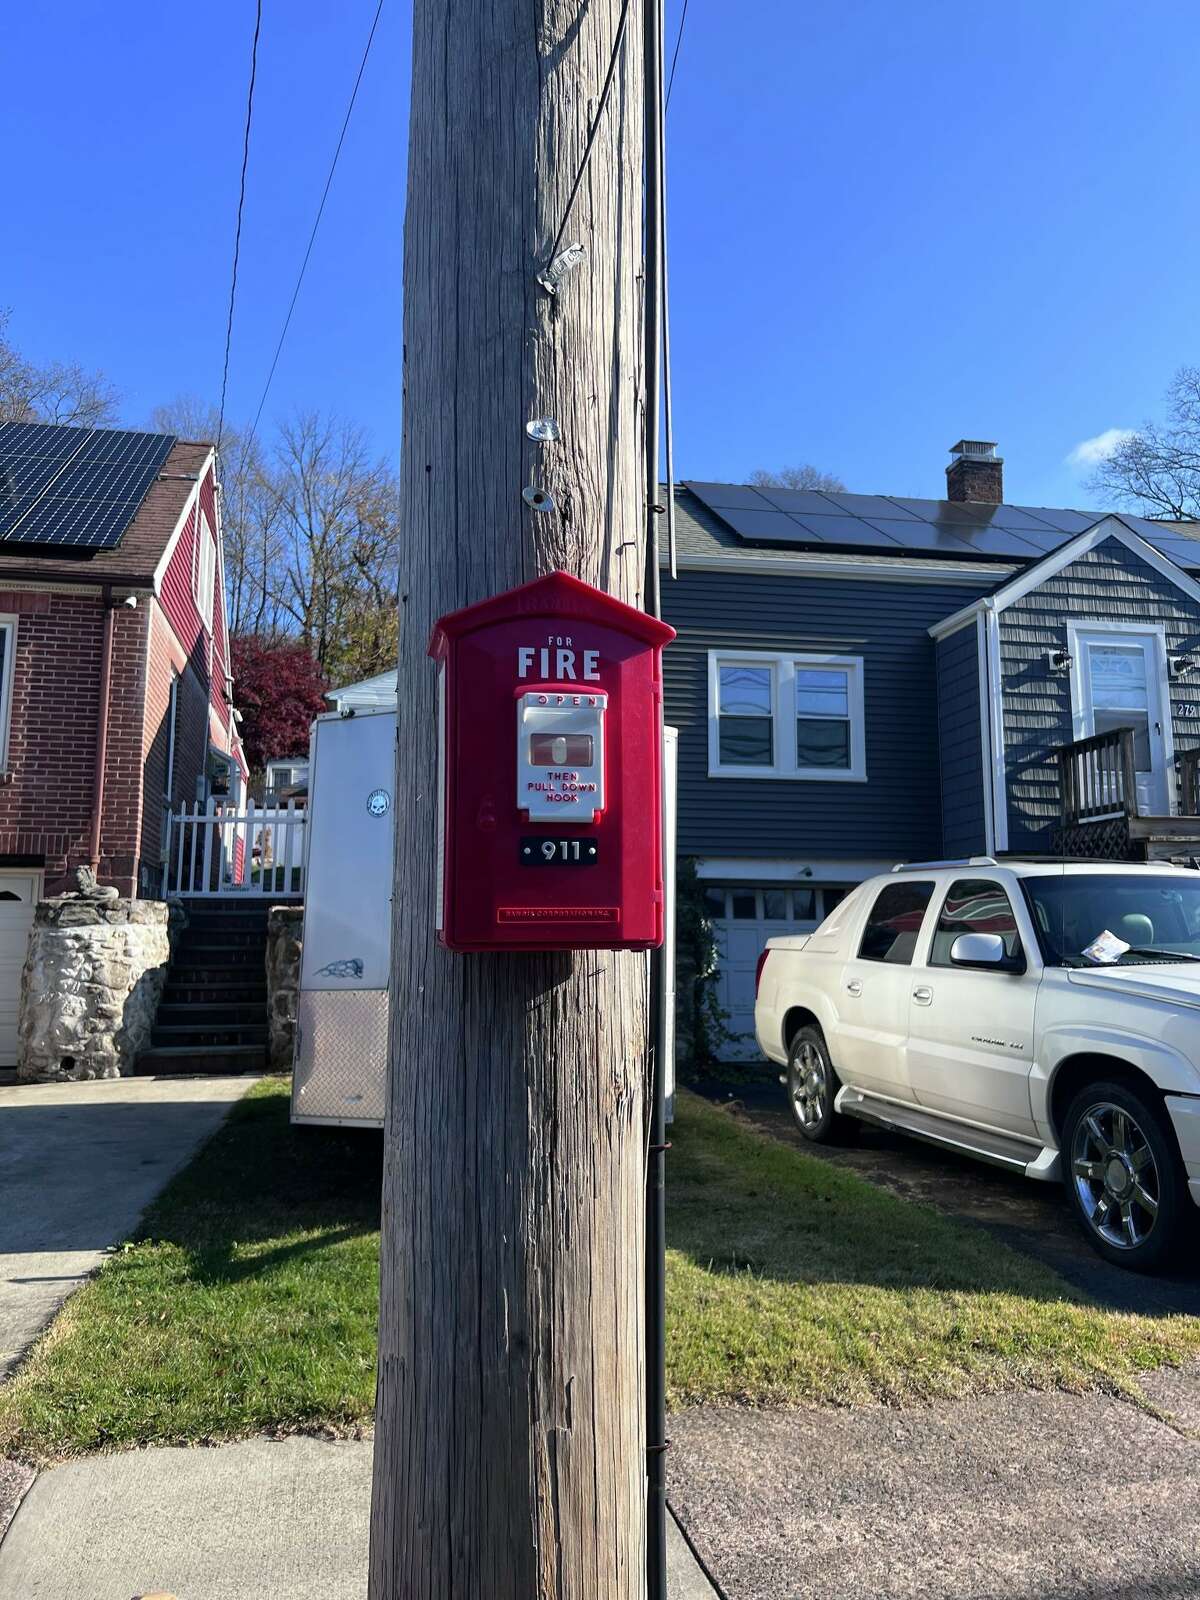 Fire Chief David Lenart spotted a fake fire call box in Derby last Friday. The utility company that owns the pole it was attached to has since removed it.